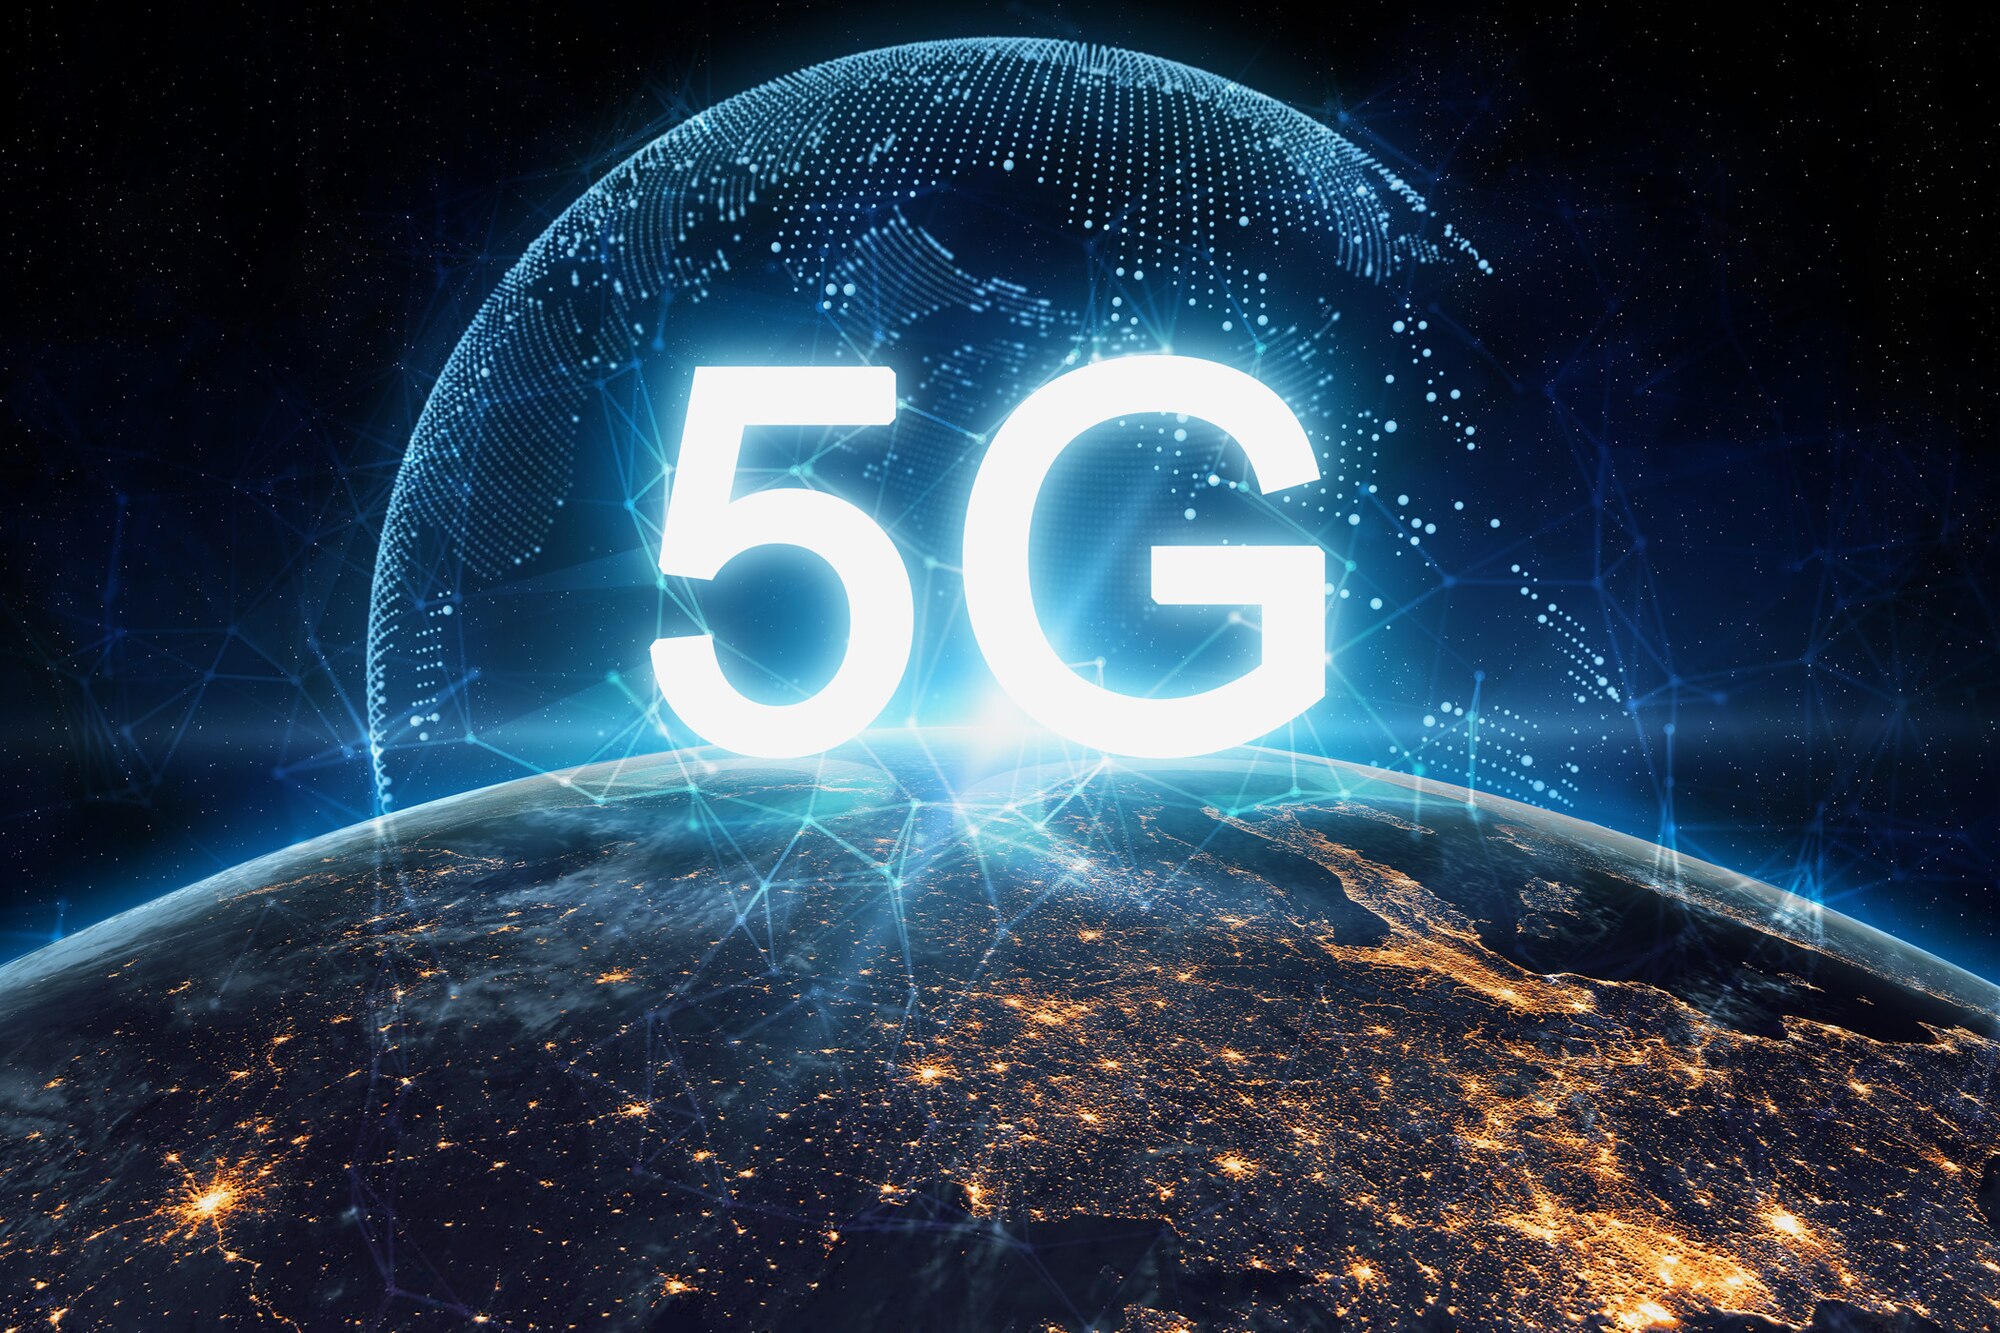 The Department of Defense has named seven U.S. military installations as the latest sites where it will conduct fifth-generation (5G) communications technology experimentation and testing.